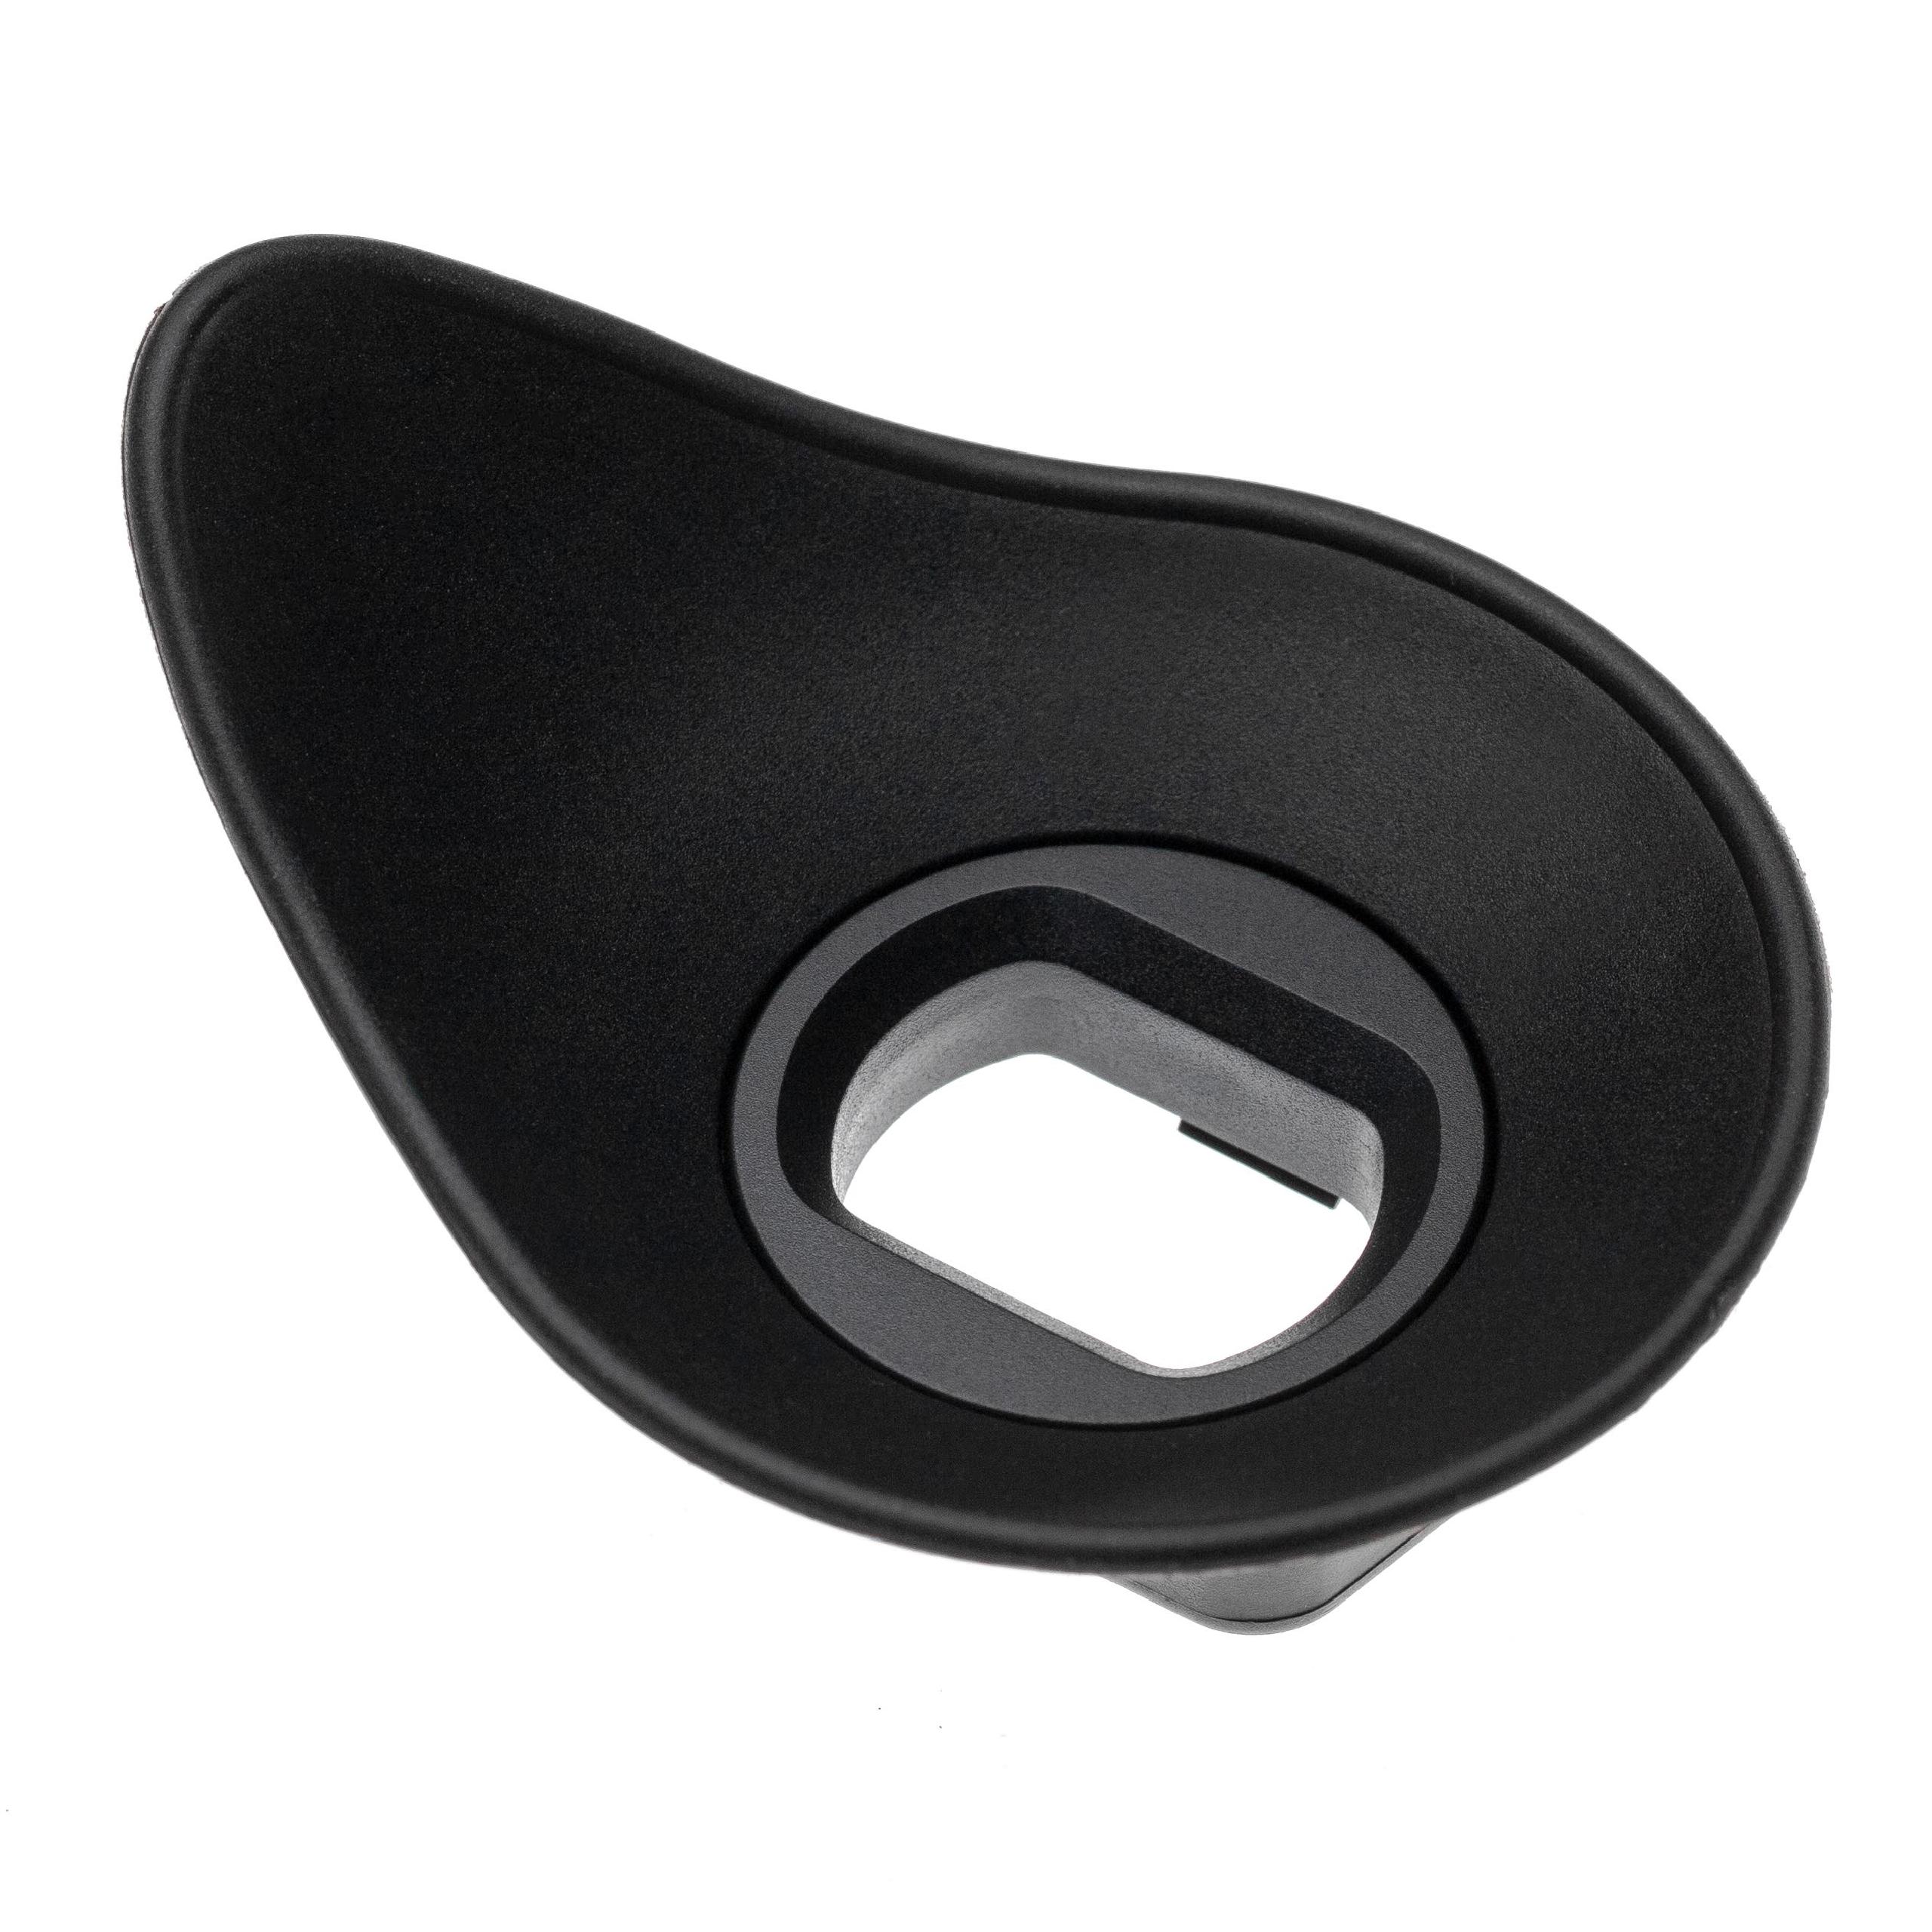 Eye Cup replaces Sony FDA-EP10 for Sony A6000 etc., Plastic, Rubber